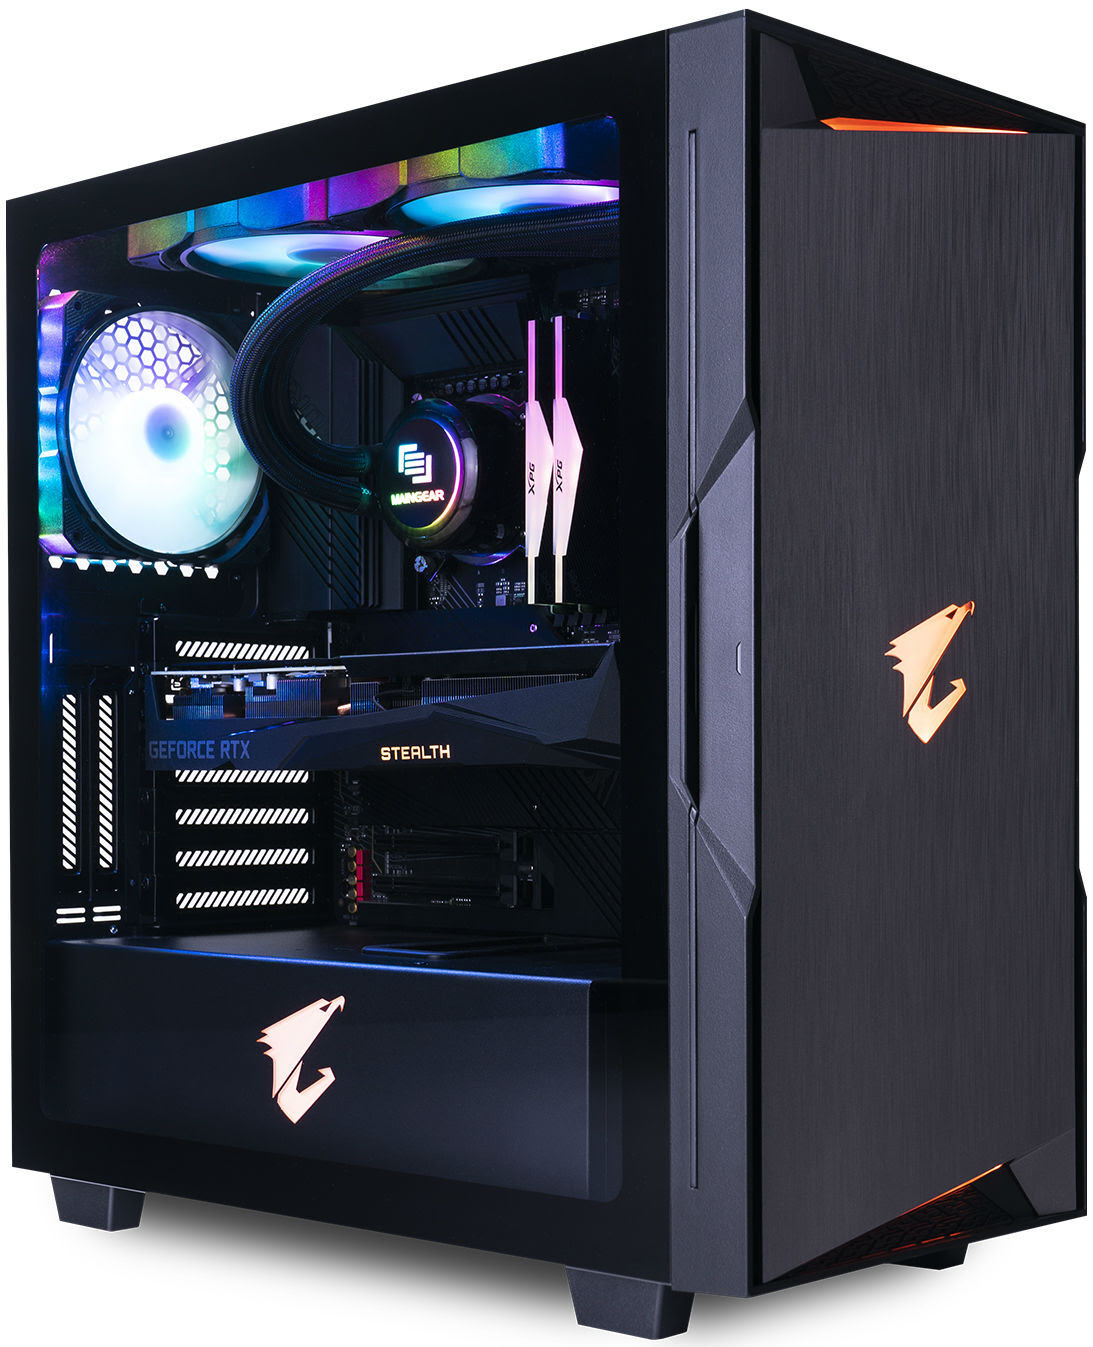 MAINGEAR Launches the MAINGEAR Stealth Gaming Desktop Ft. Revolutionary Cable Management Design